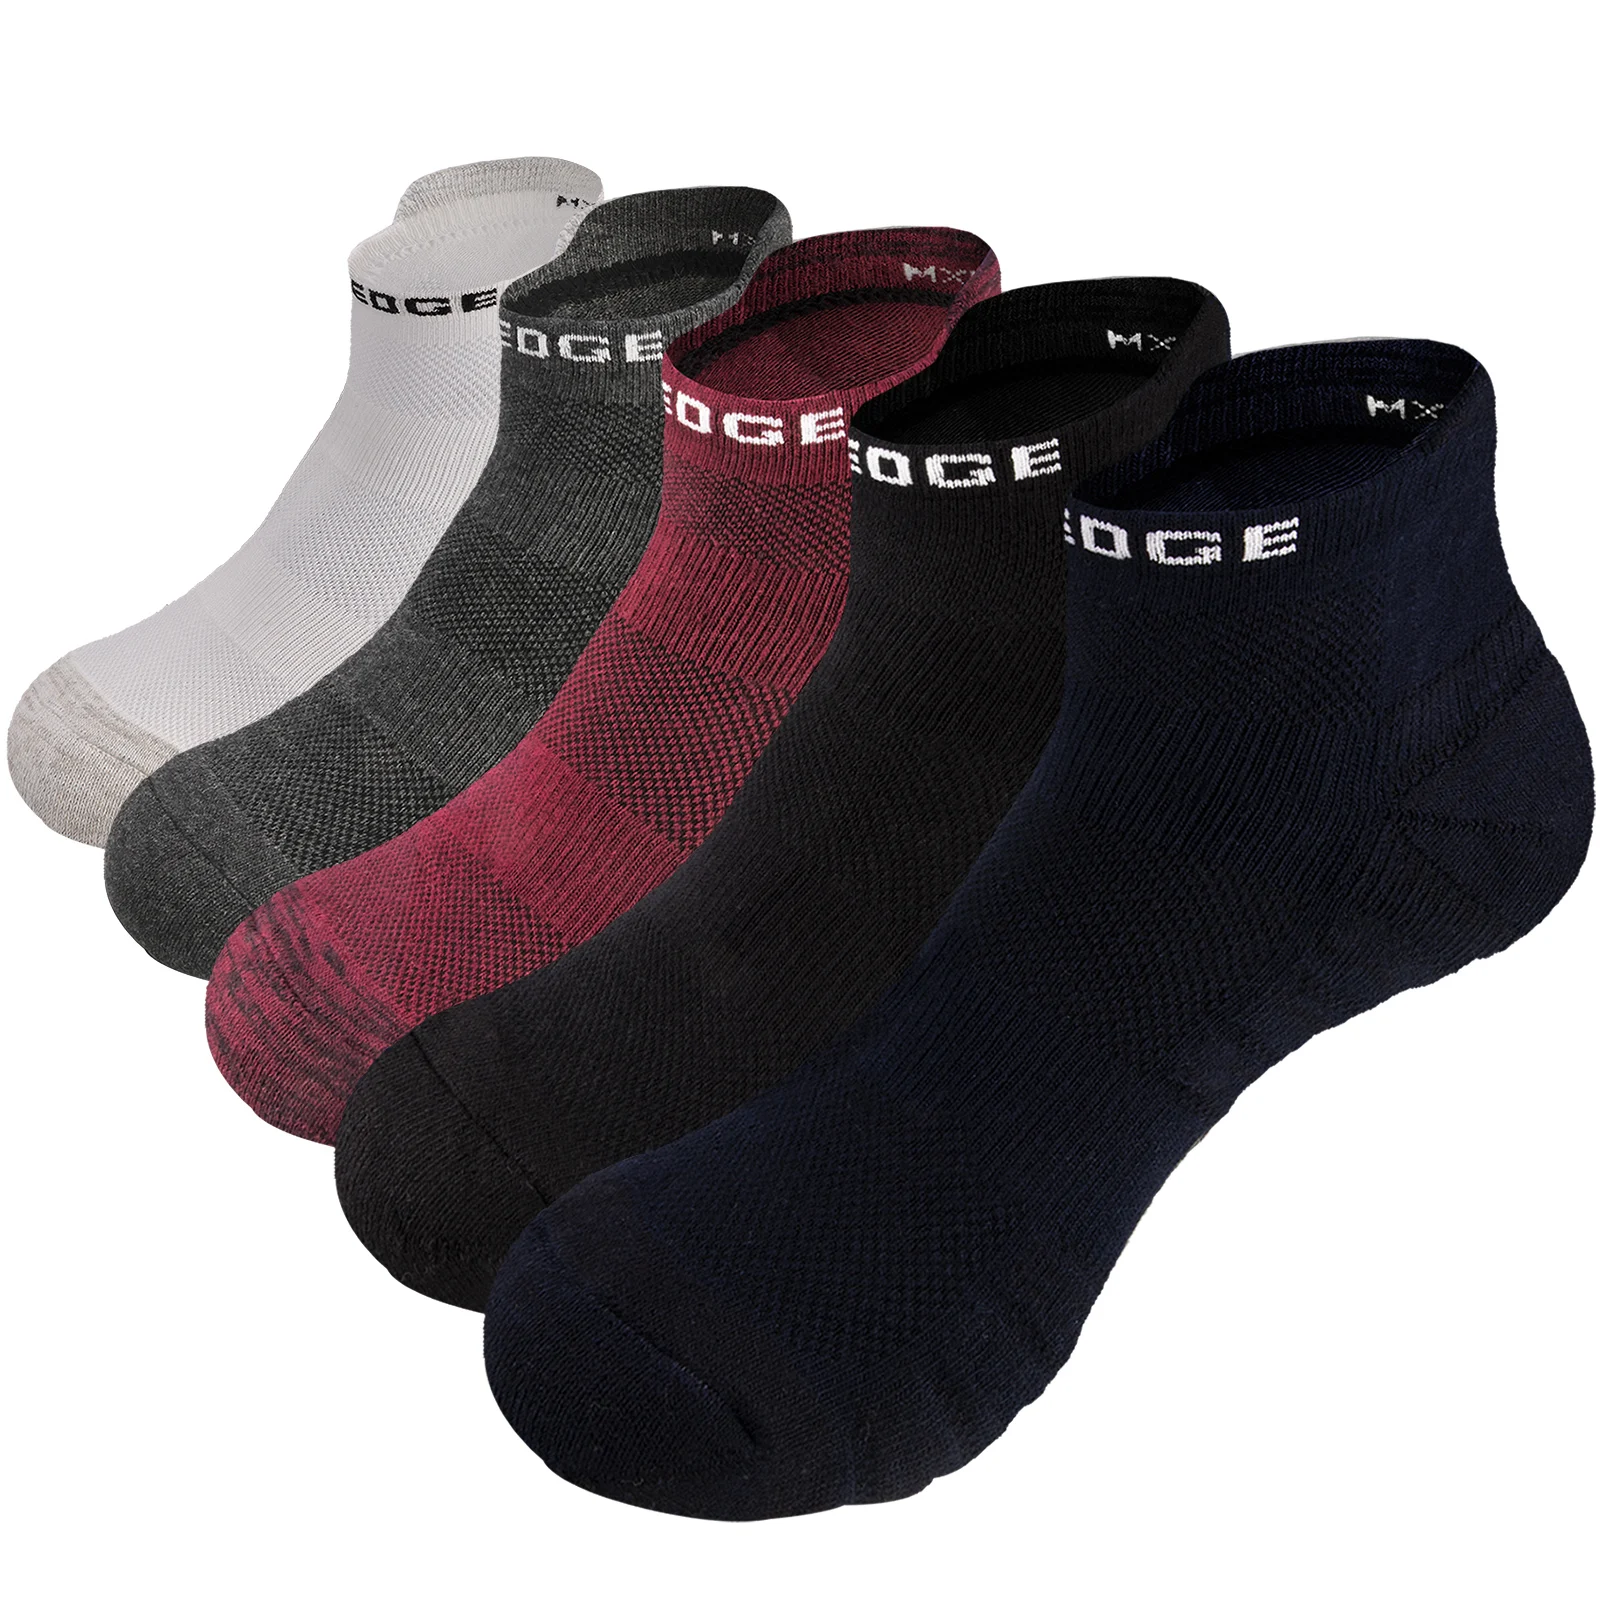 YUEDGE Mens Cushioned Cotton Athletic Cycling Running Ankle Socks For Size 37-44 EU